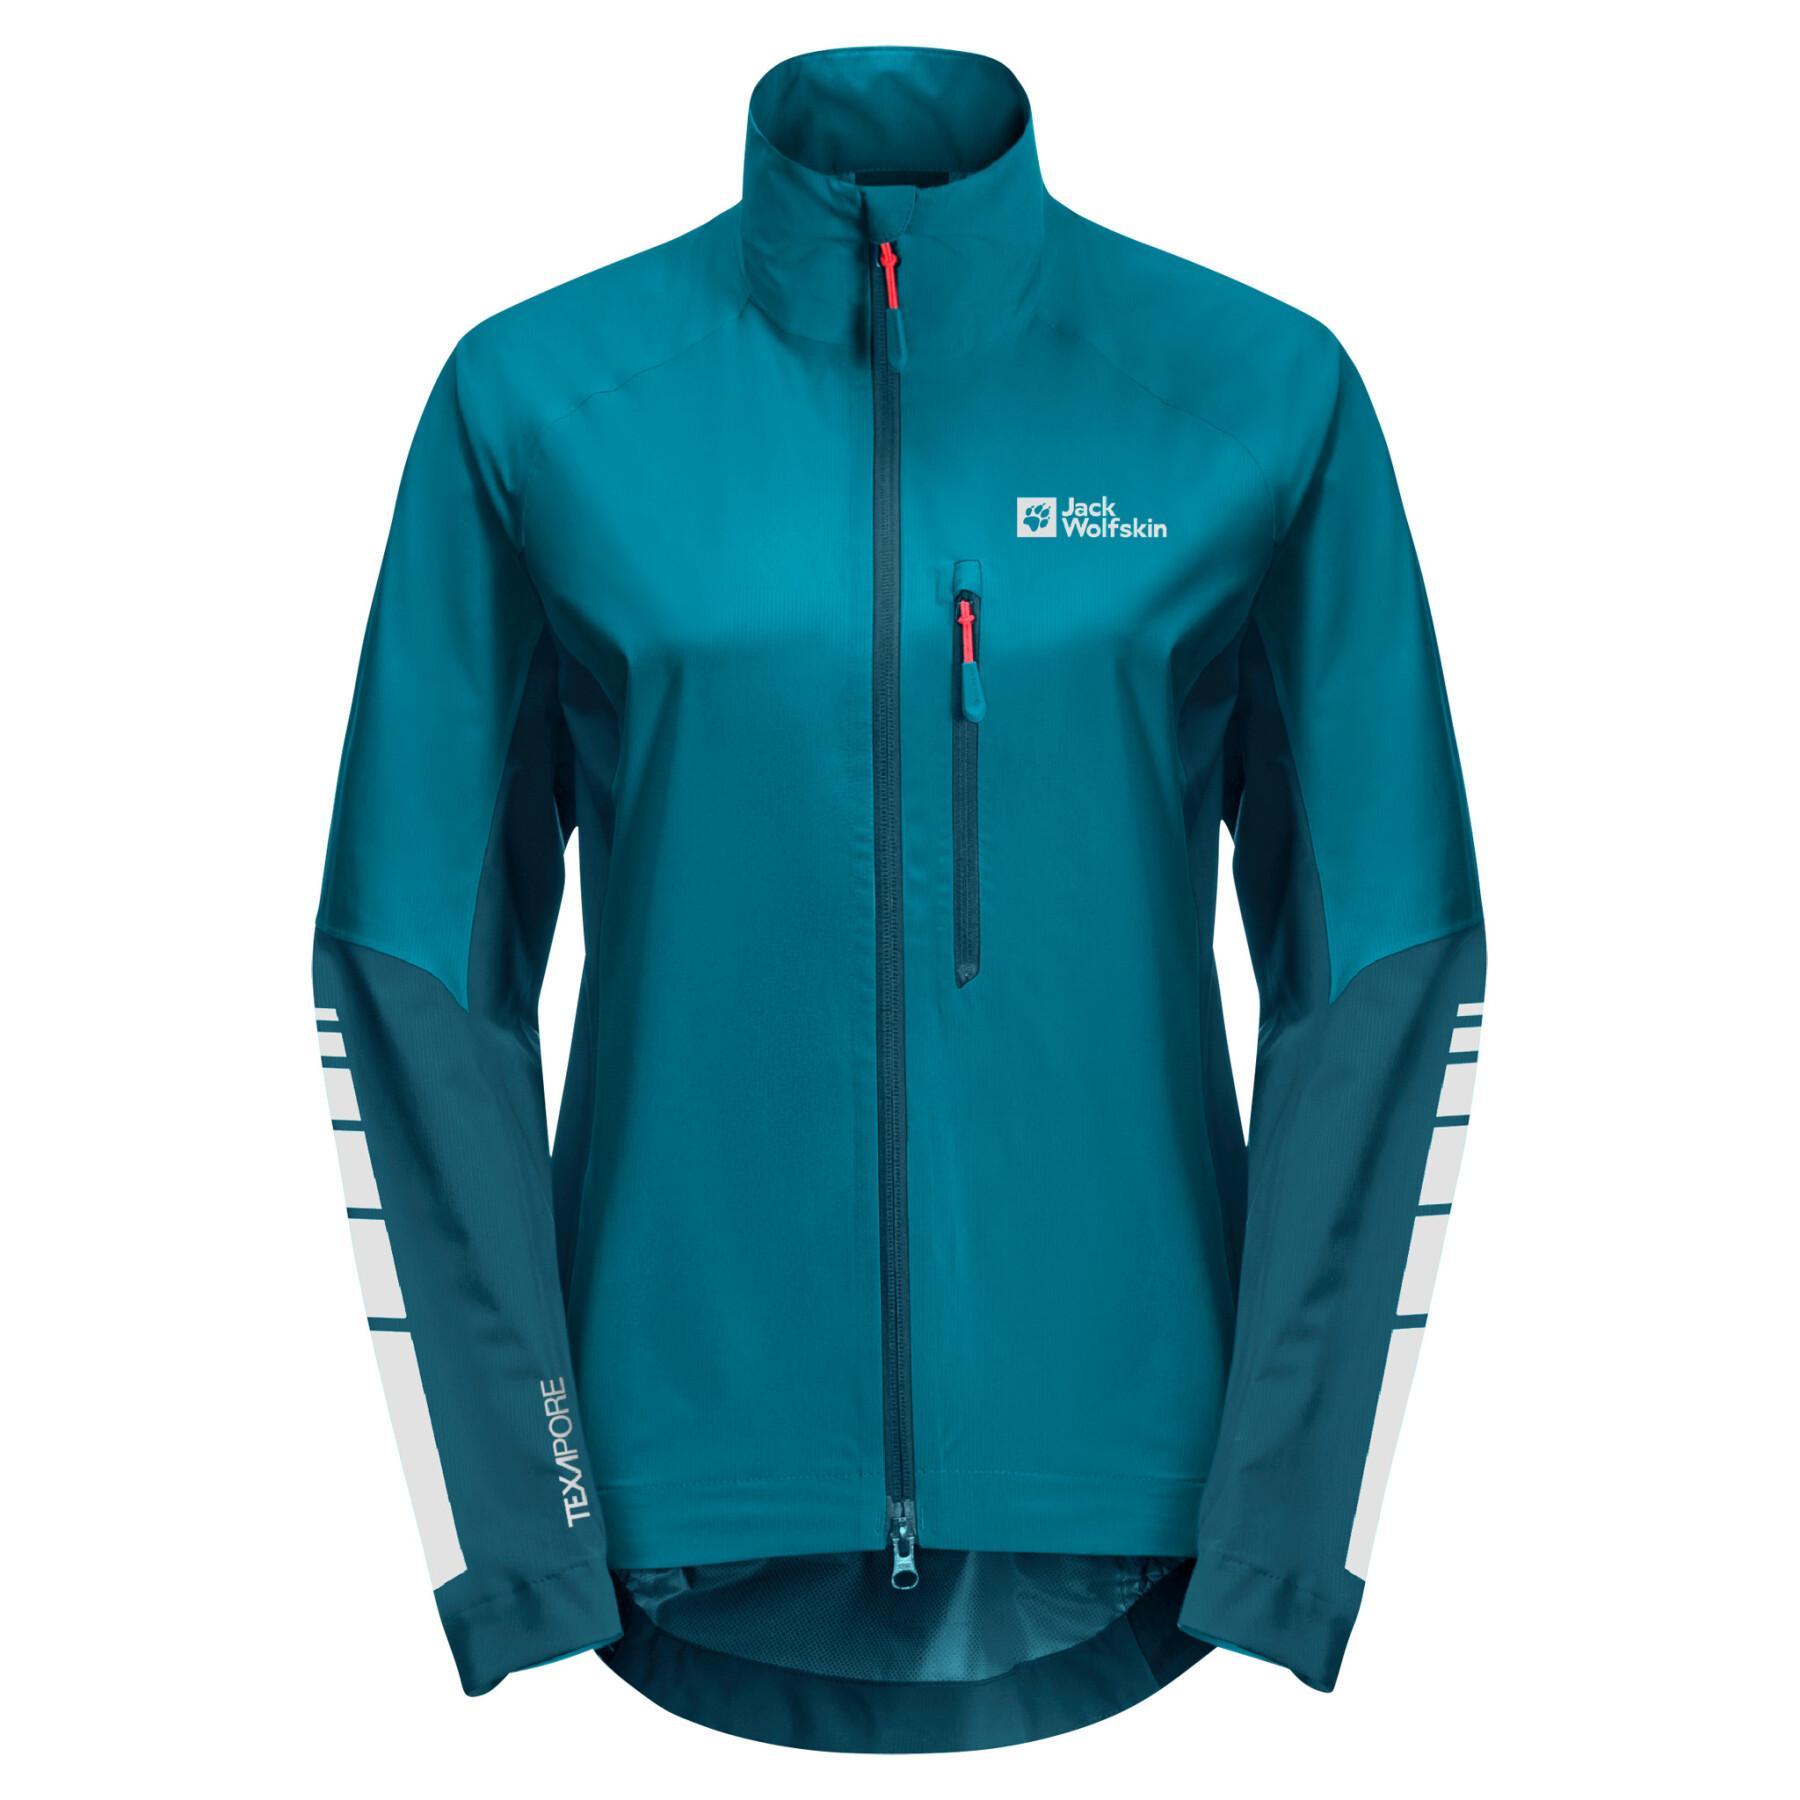 Chaqueta impermeable para mujer Jack Wolfskin Morobbia 2,5L (GT)